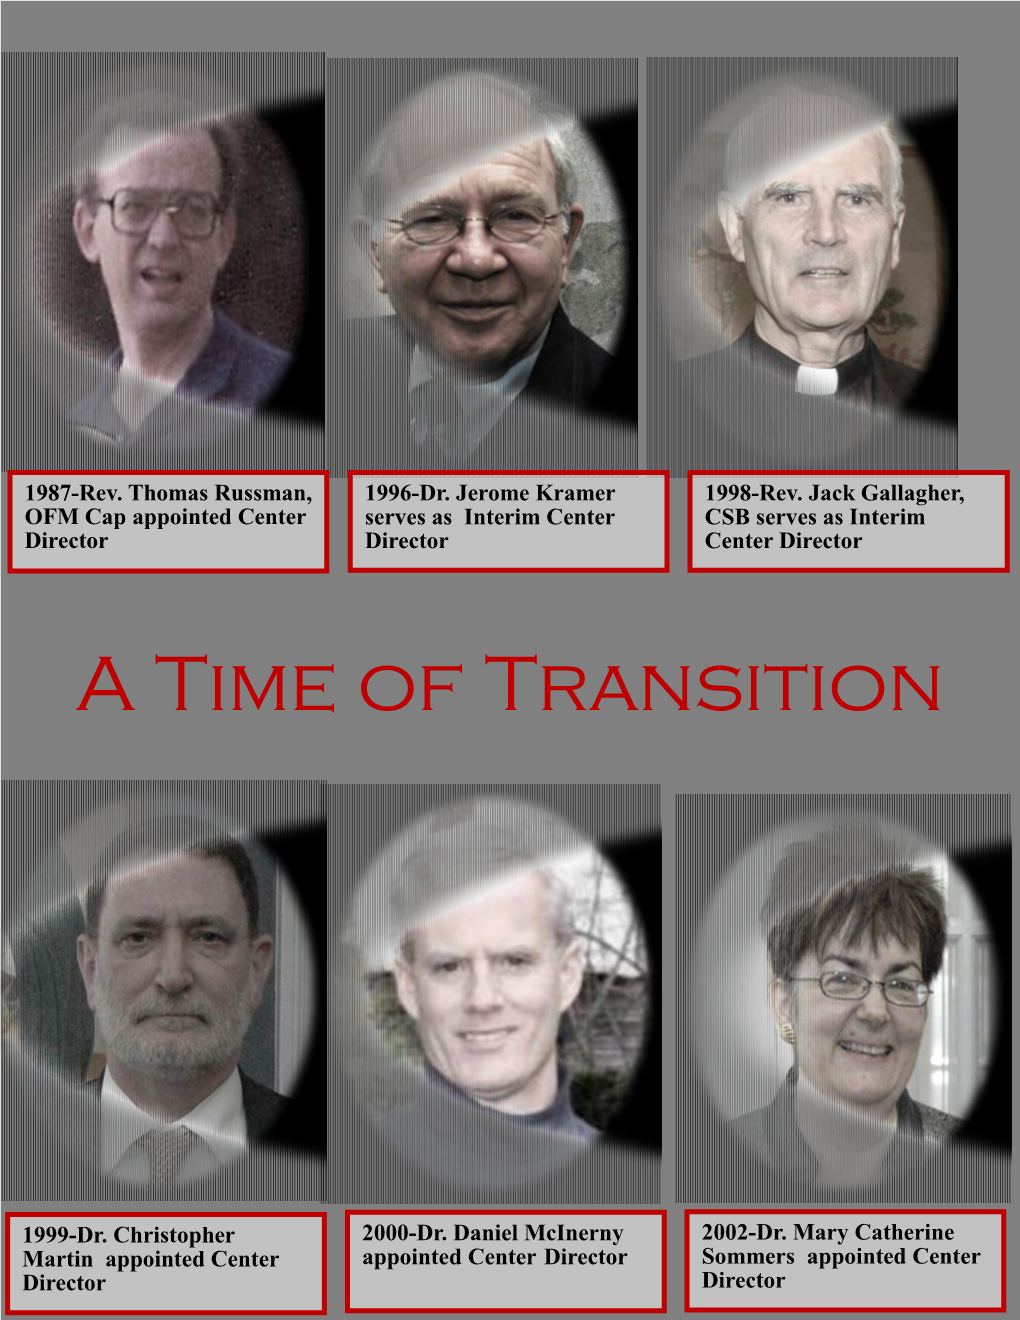 A Time of Transition: 1996-2004